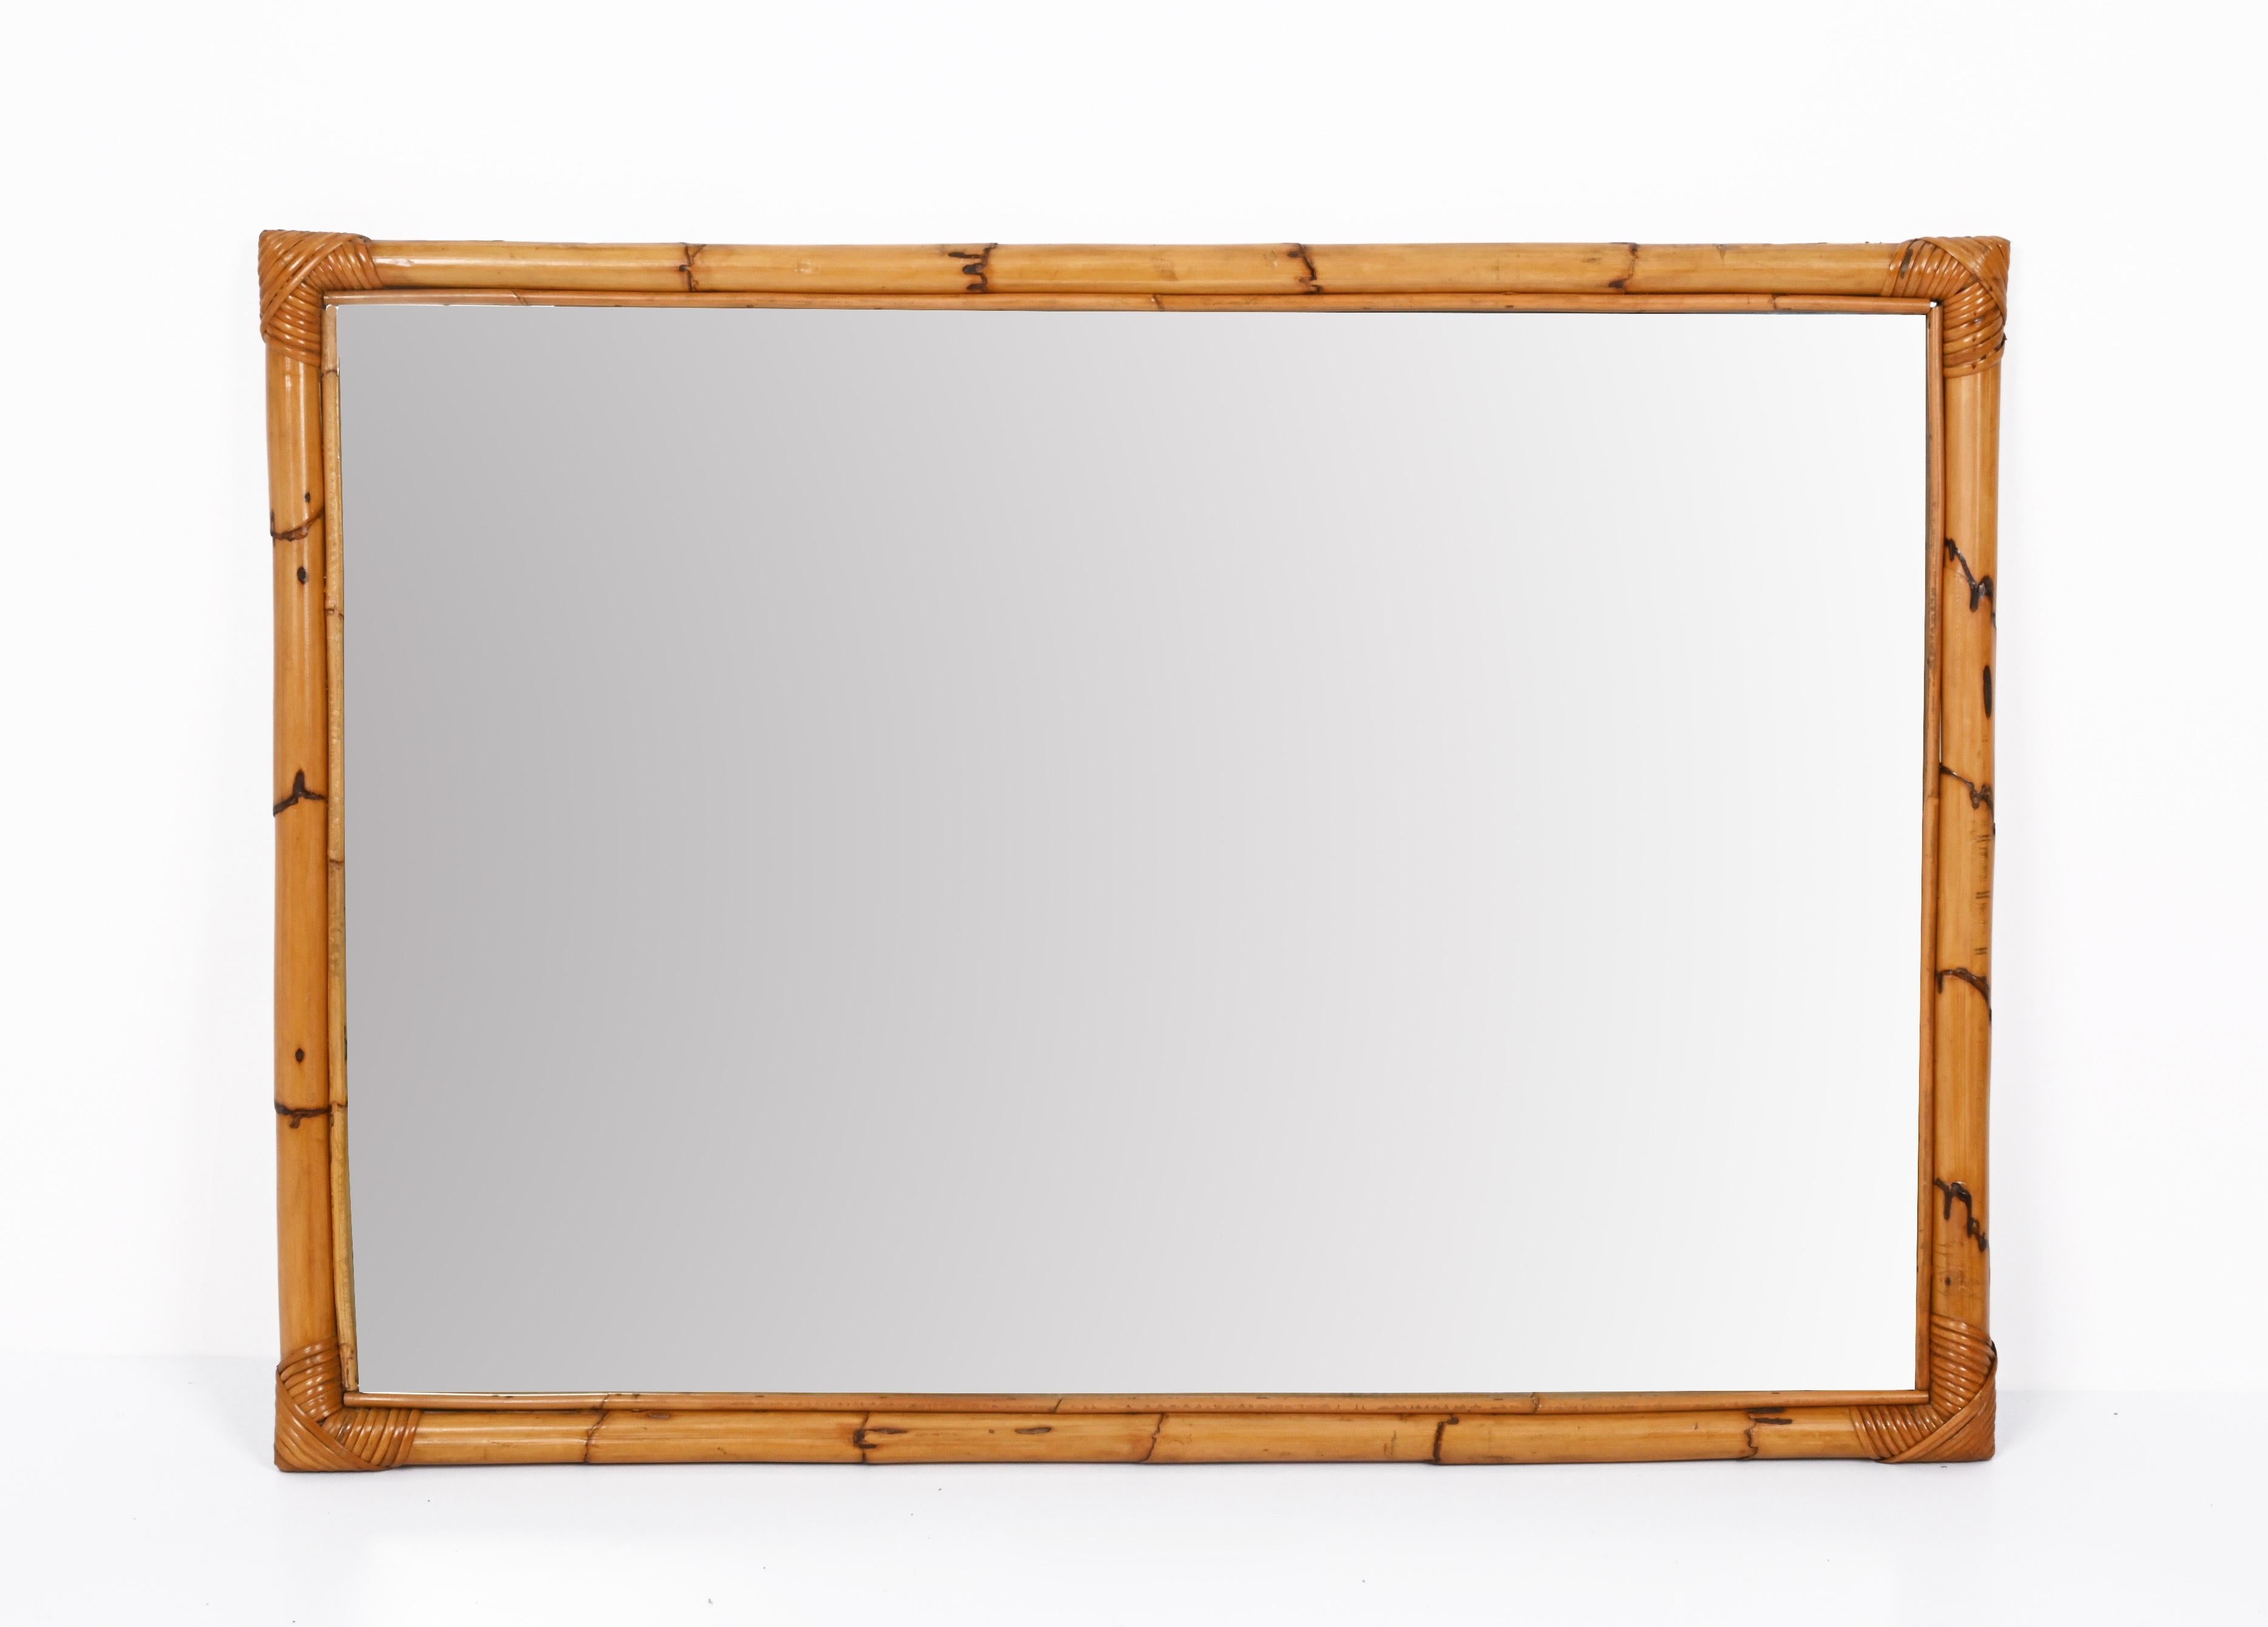 Wonderful and sizeable mid-century rectangular mirror with double bamboo cane frame. This fantastic item was produced in Italy in the 1970s.

A magnificent product, the way the straight lines of the bamboo integrate with the mirror is simply